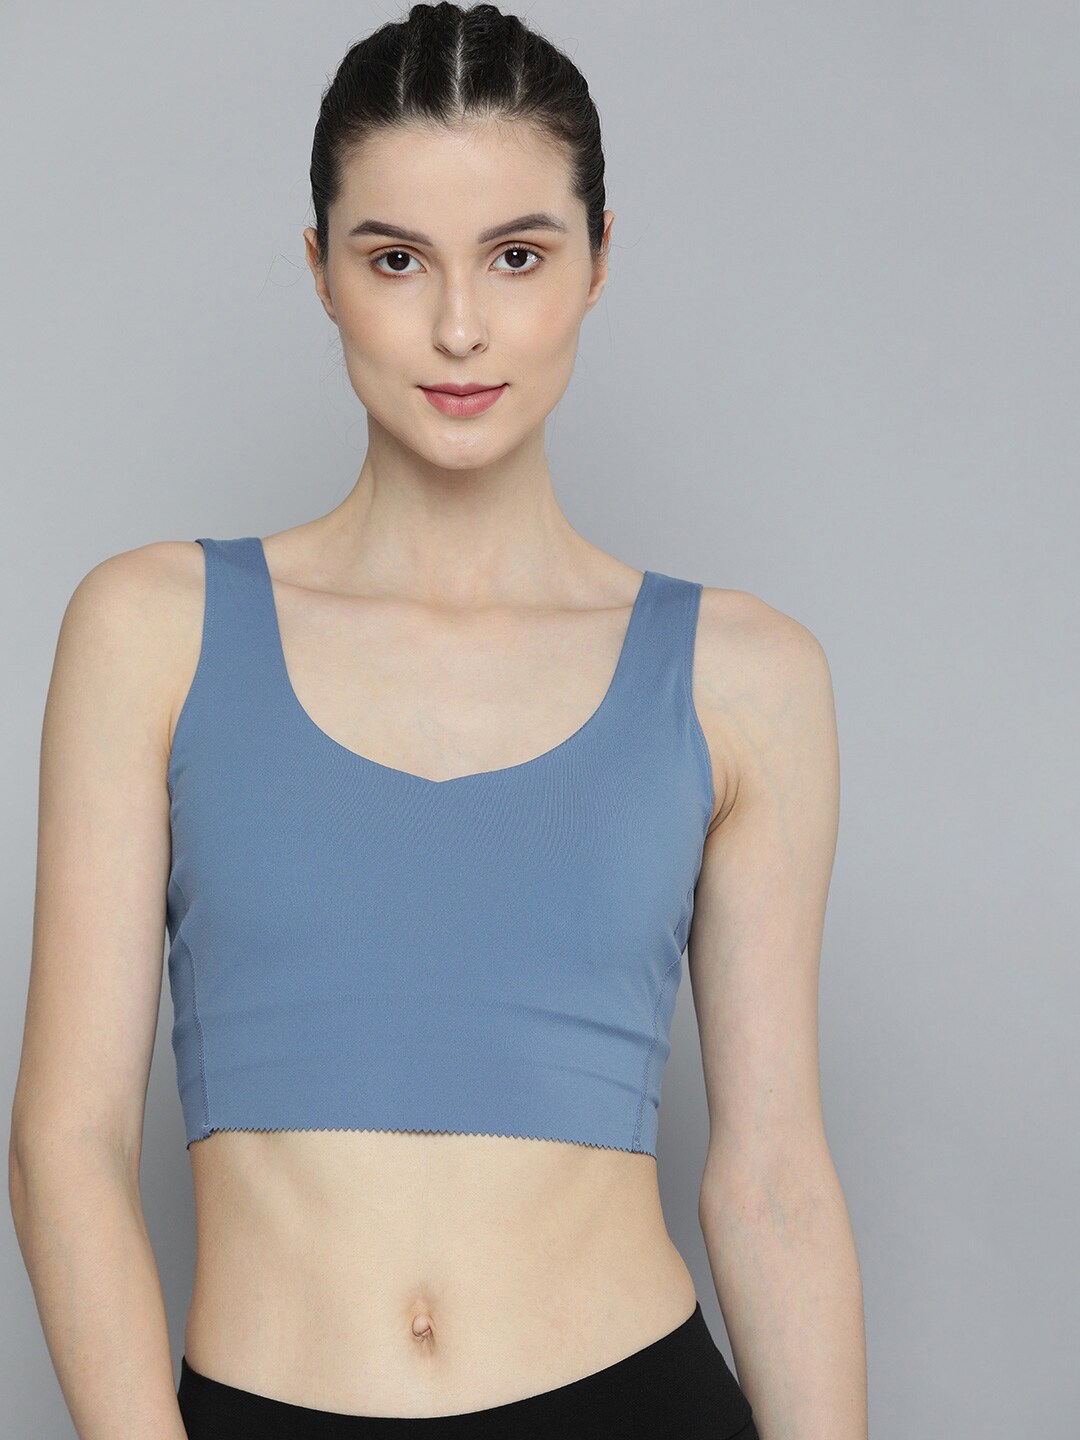 Skechers Blue Typography Printed GOSCULPT SCALLOPED Lightly Padded Bra WBR115 Price in India